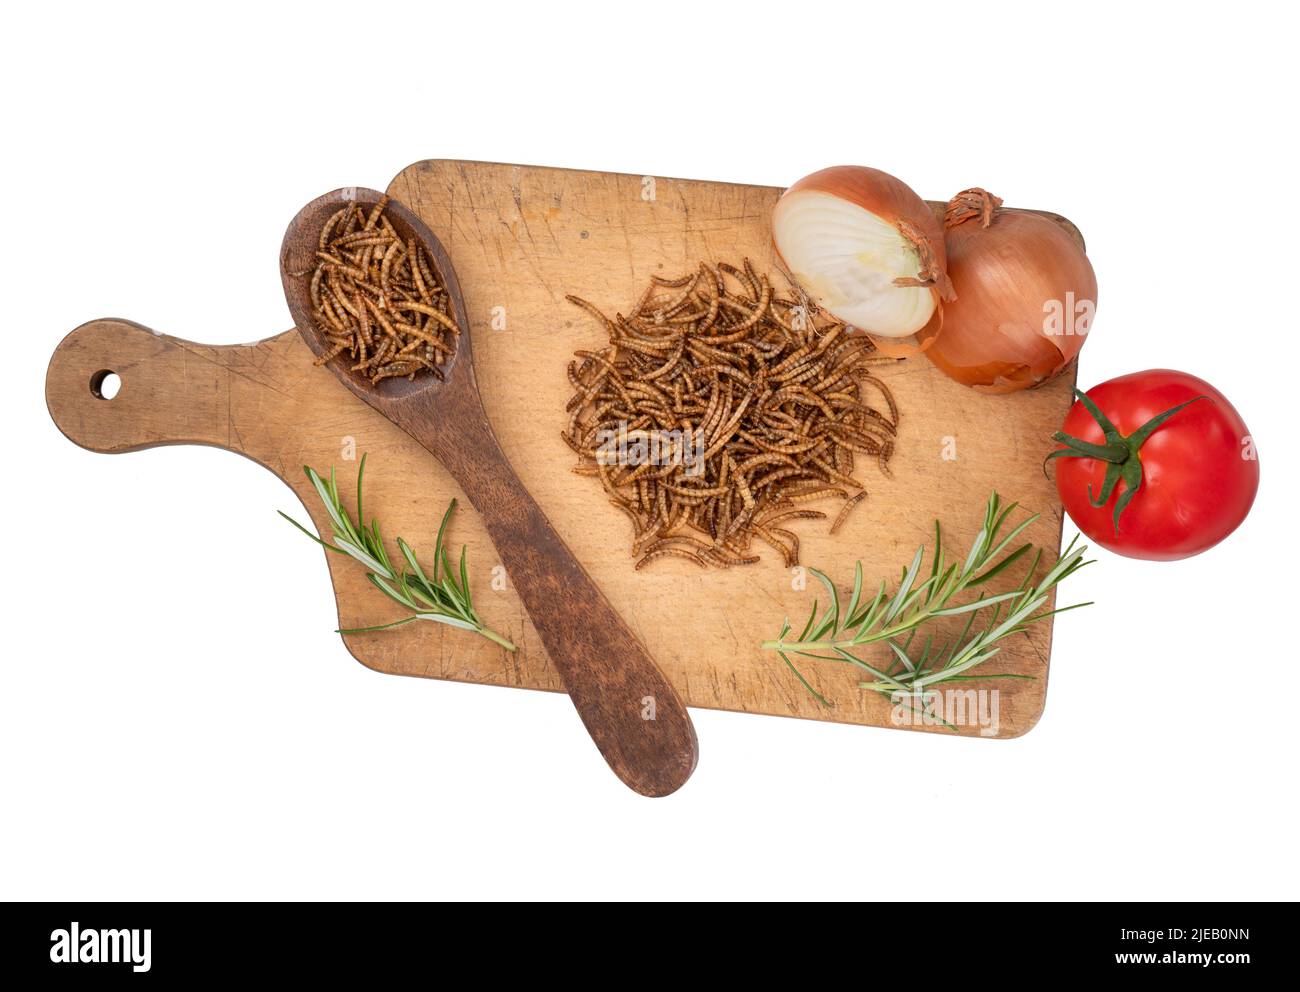 Cooking with mealworms, insect protein, with onion, tomato and rosemary. Ingredients isolated on white. Stock Photo